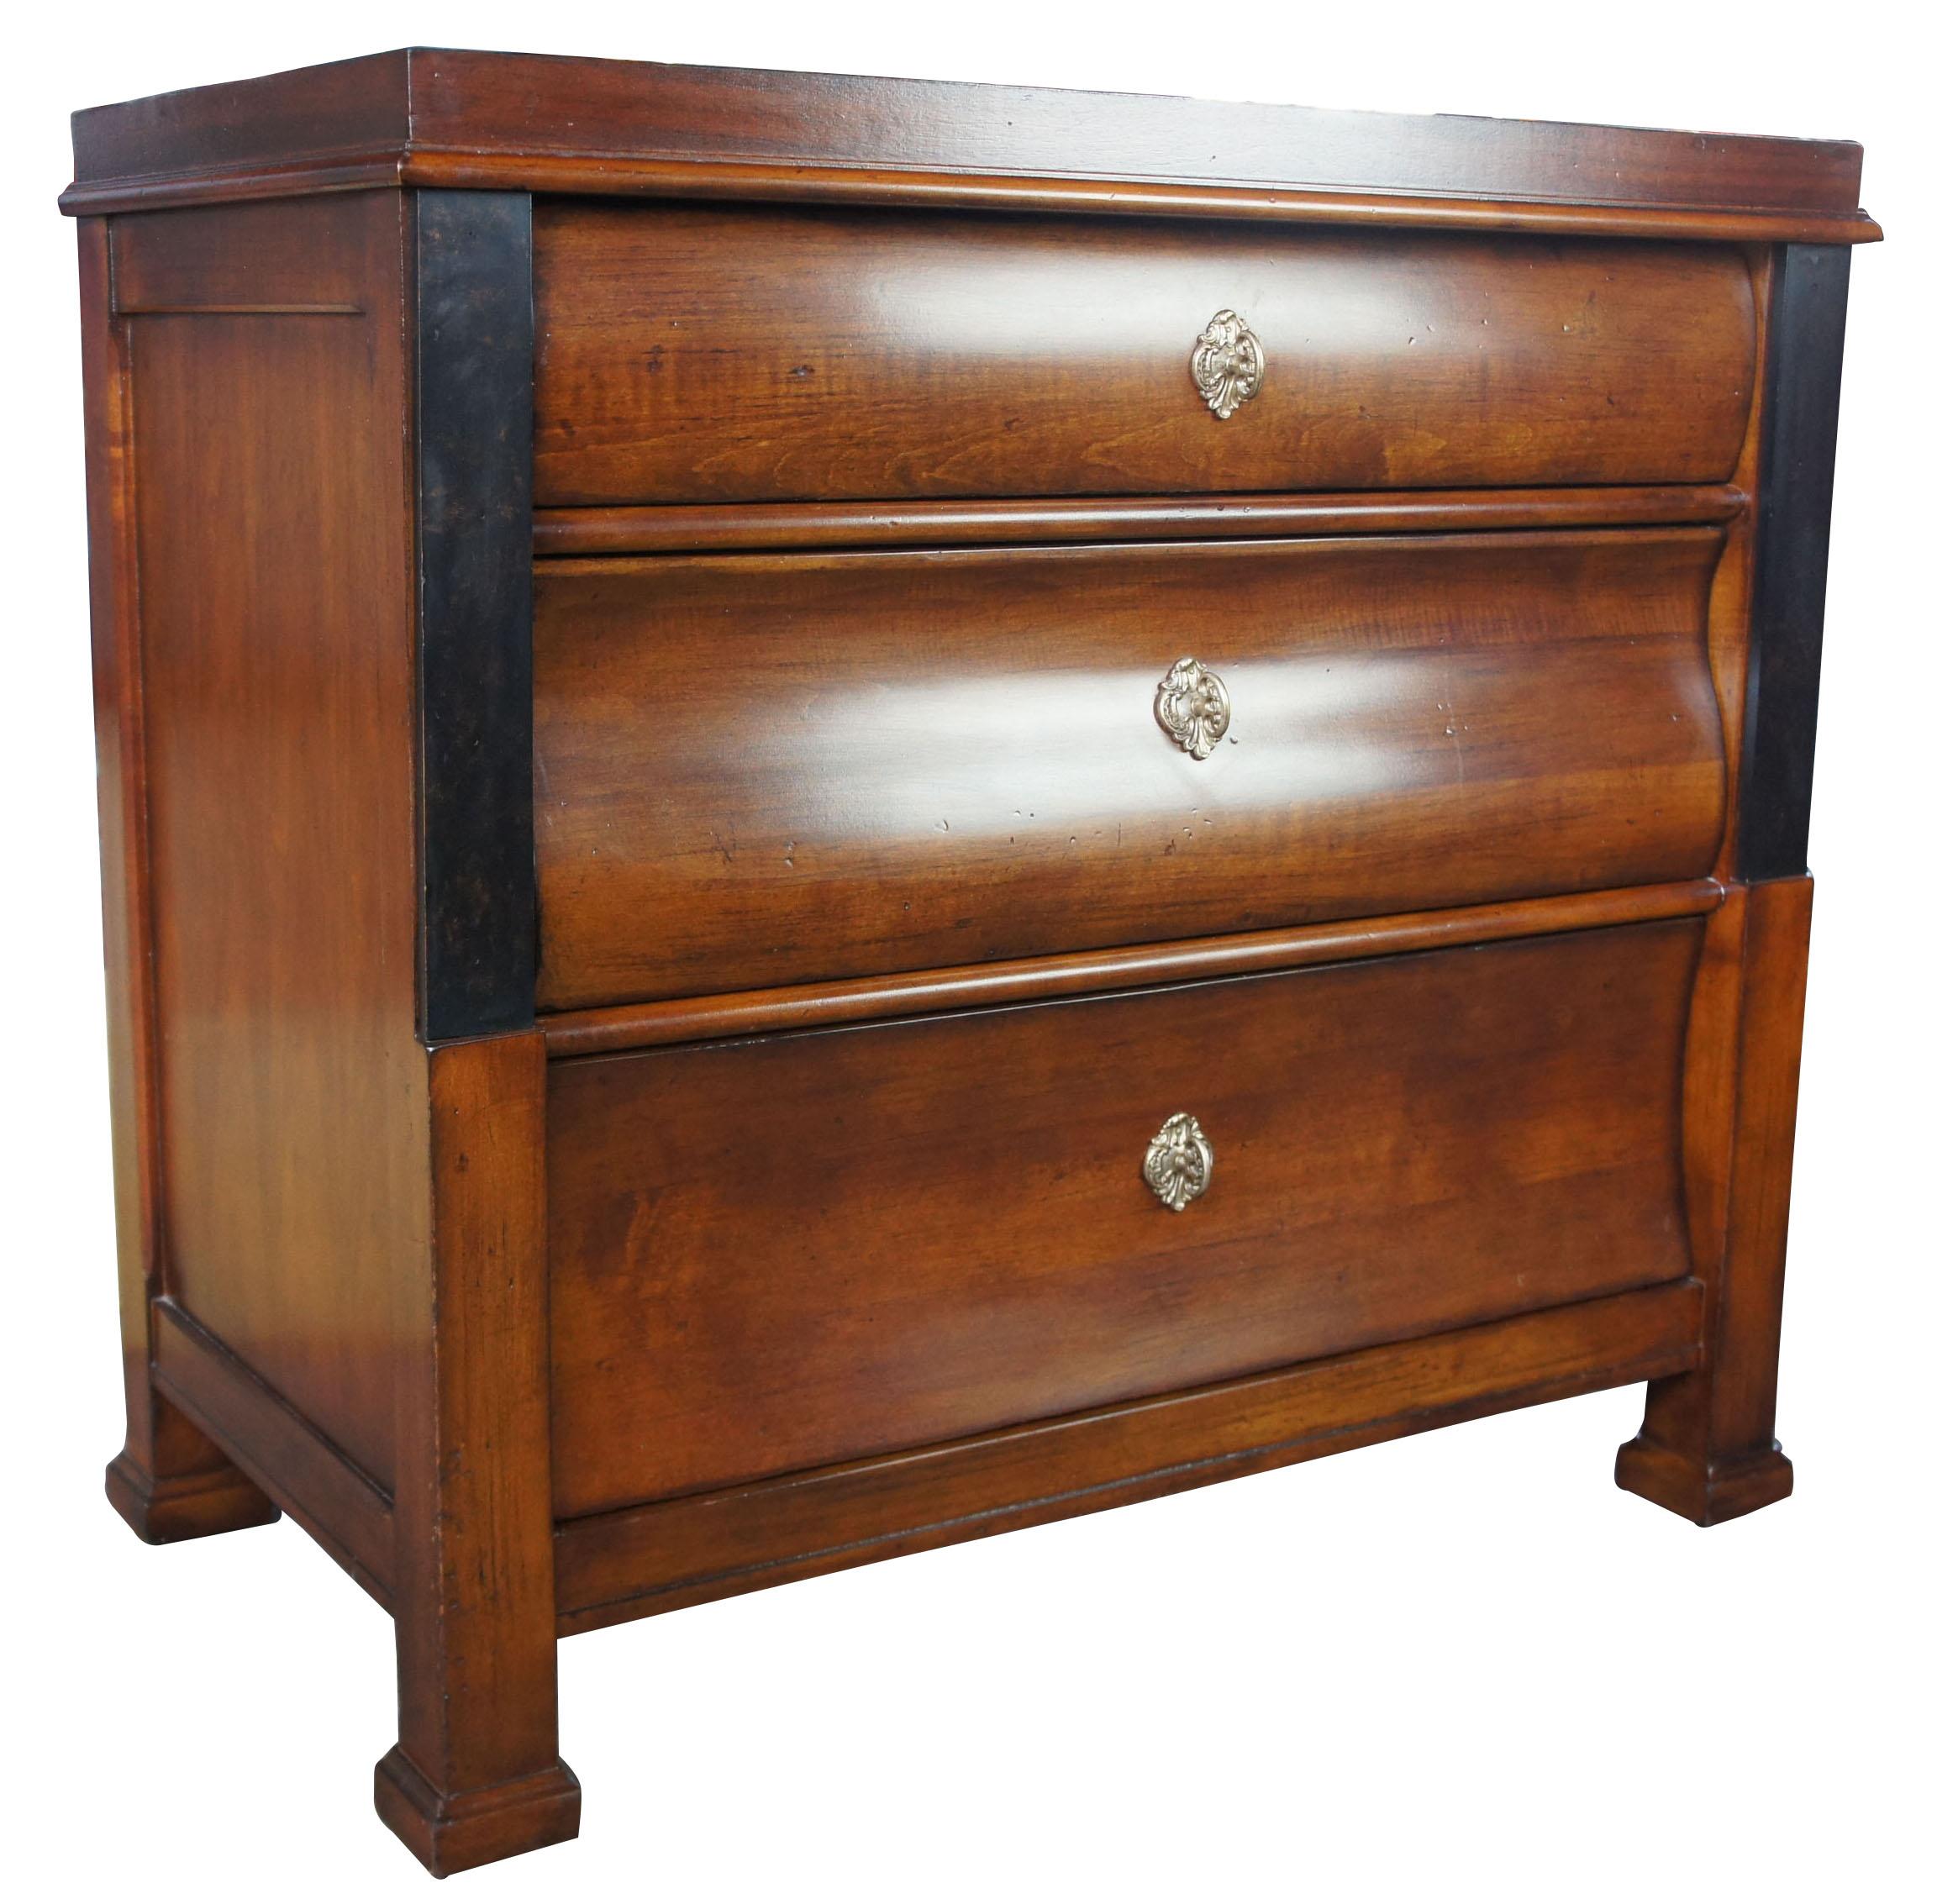 Century Furniture Ingre nightstand bedside chest consulate Napoleon neoclassical

591-226
Made from Maple & Walnut Veneers

Consulate is inspired by the furniture designs of the era following the French Revolution, the age of Napoleon